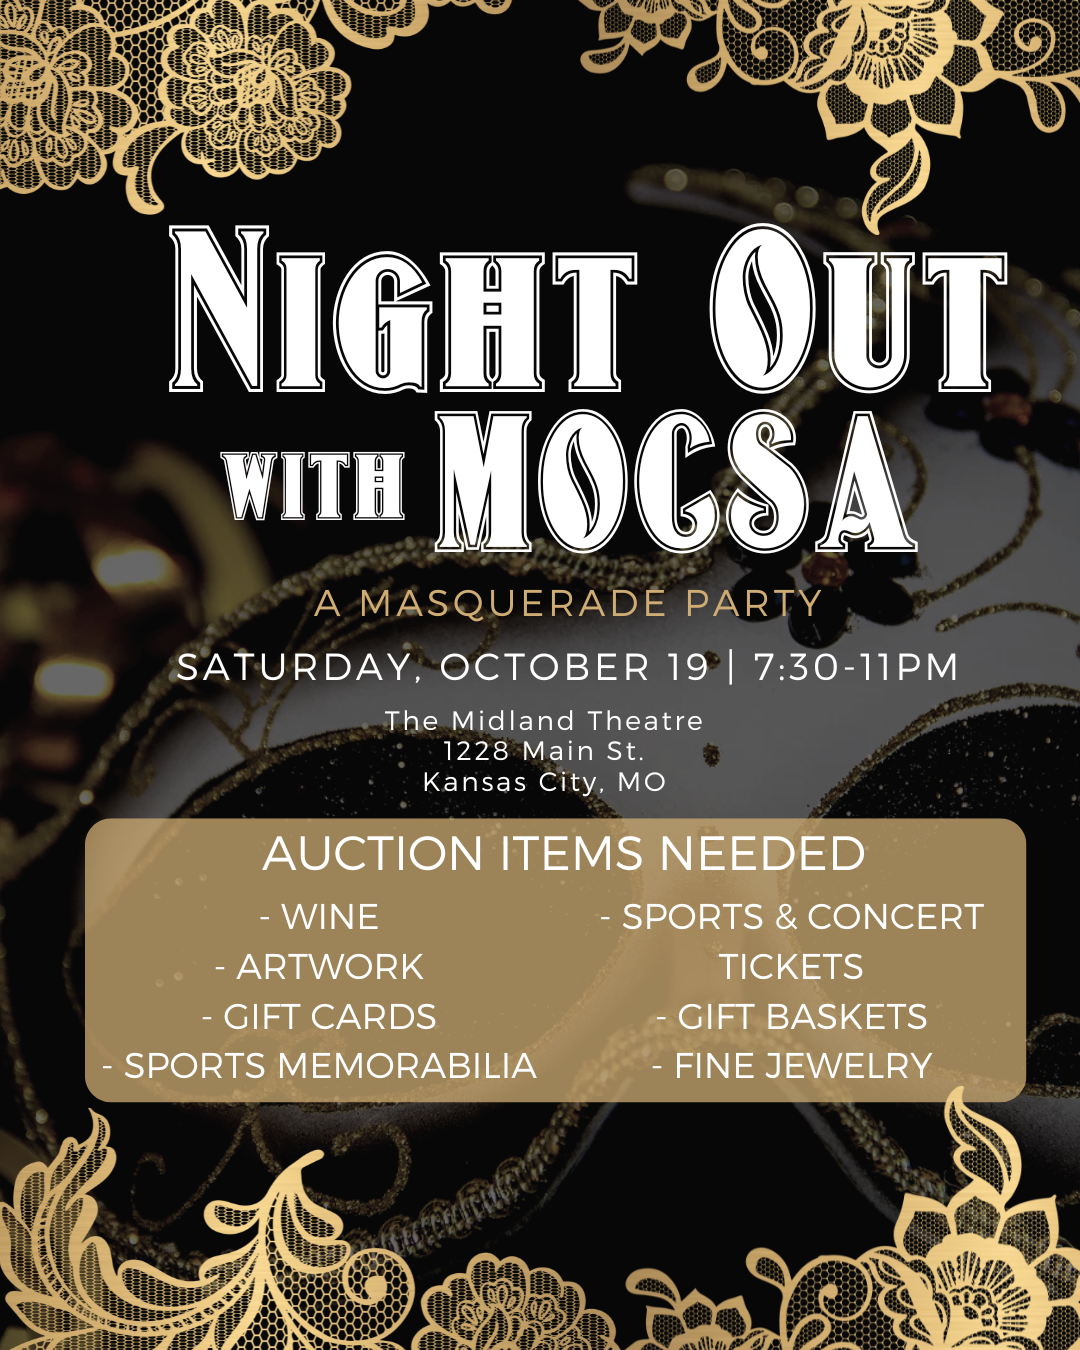 White text on tan background reads auction items needed - wine - artwork - gift cards - sports memorabilia - sports & Concert Tickets - gift baskets - fine jewelry